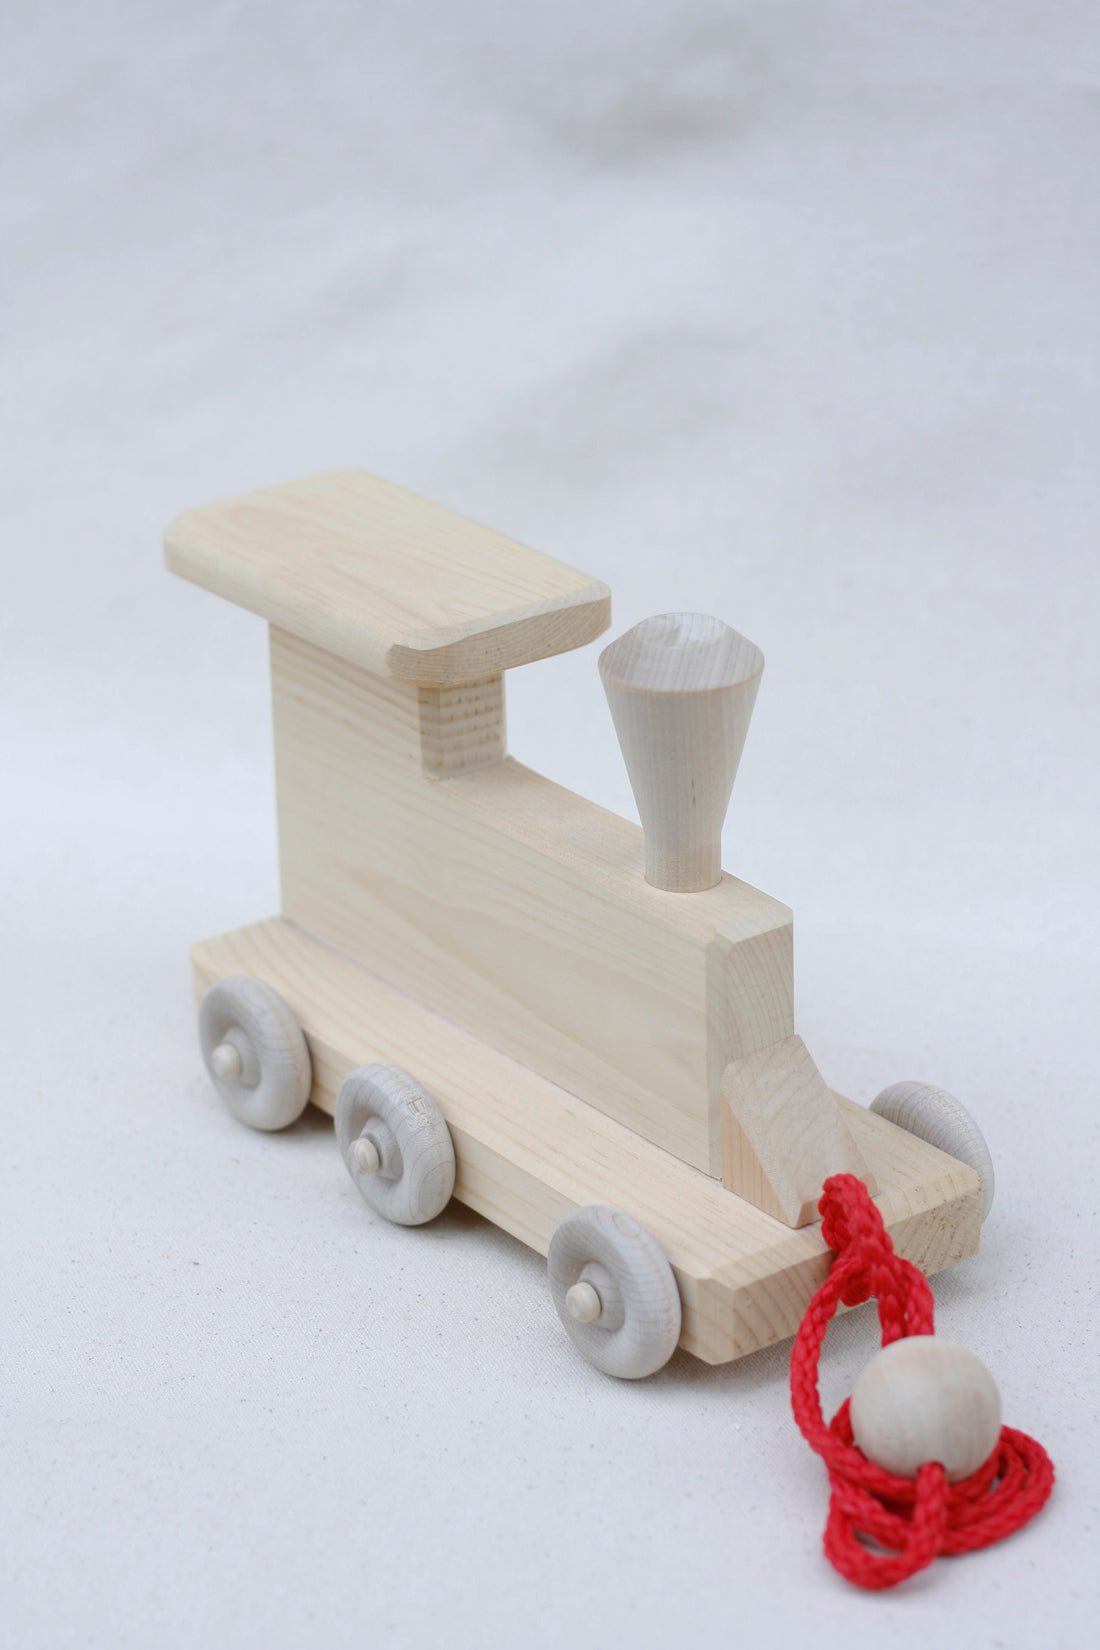 Wooden train by Thorpe Toys